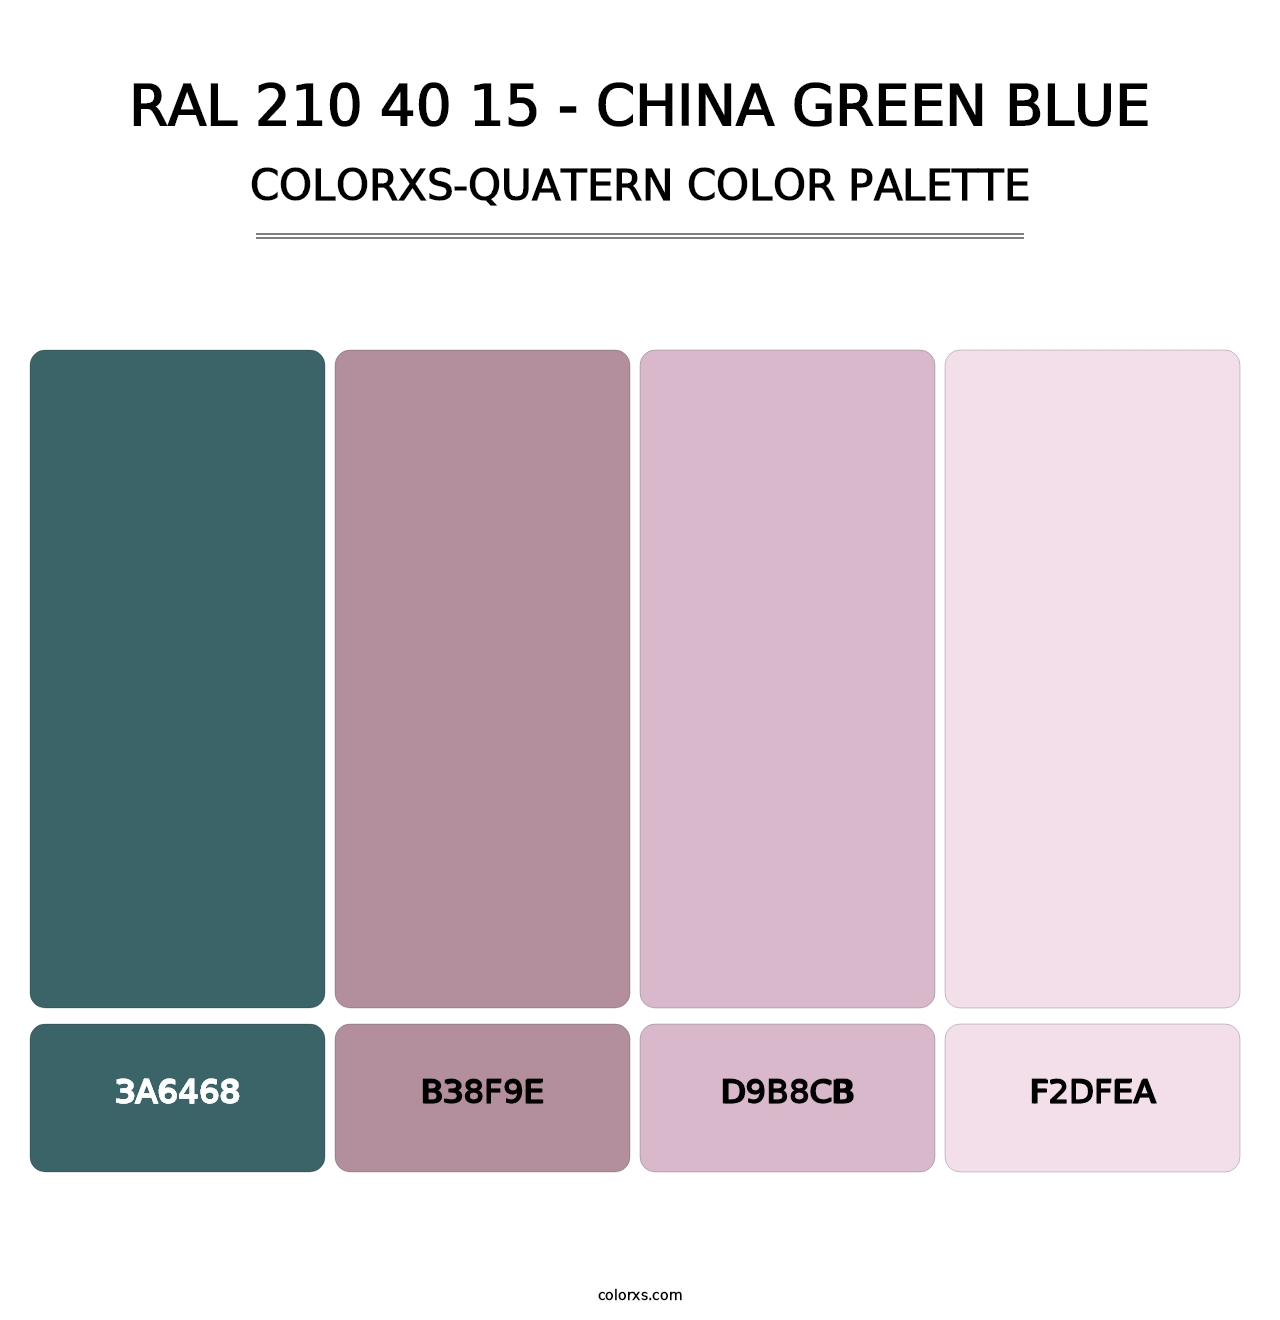 RAL 210 40 15 - China Green Blue - Colorxs Quatern Palette